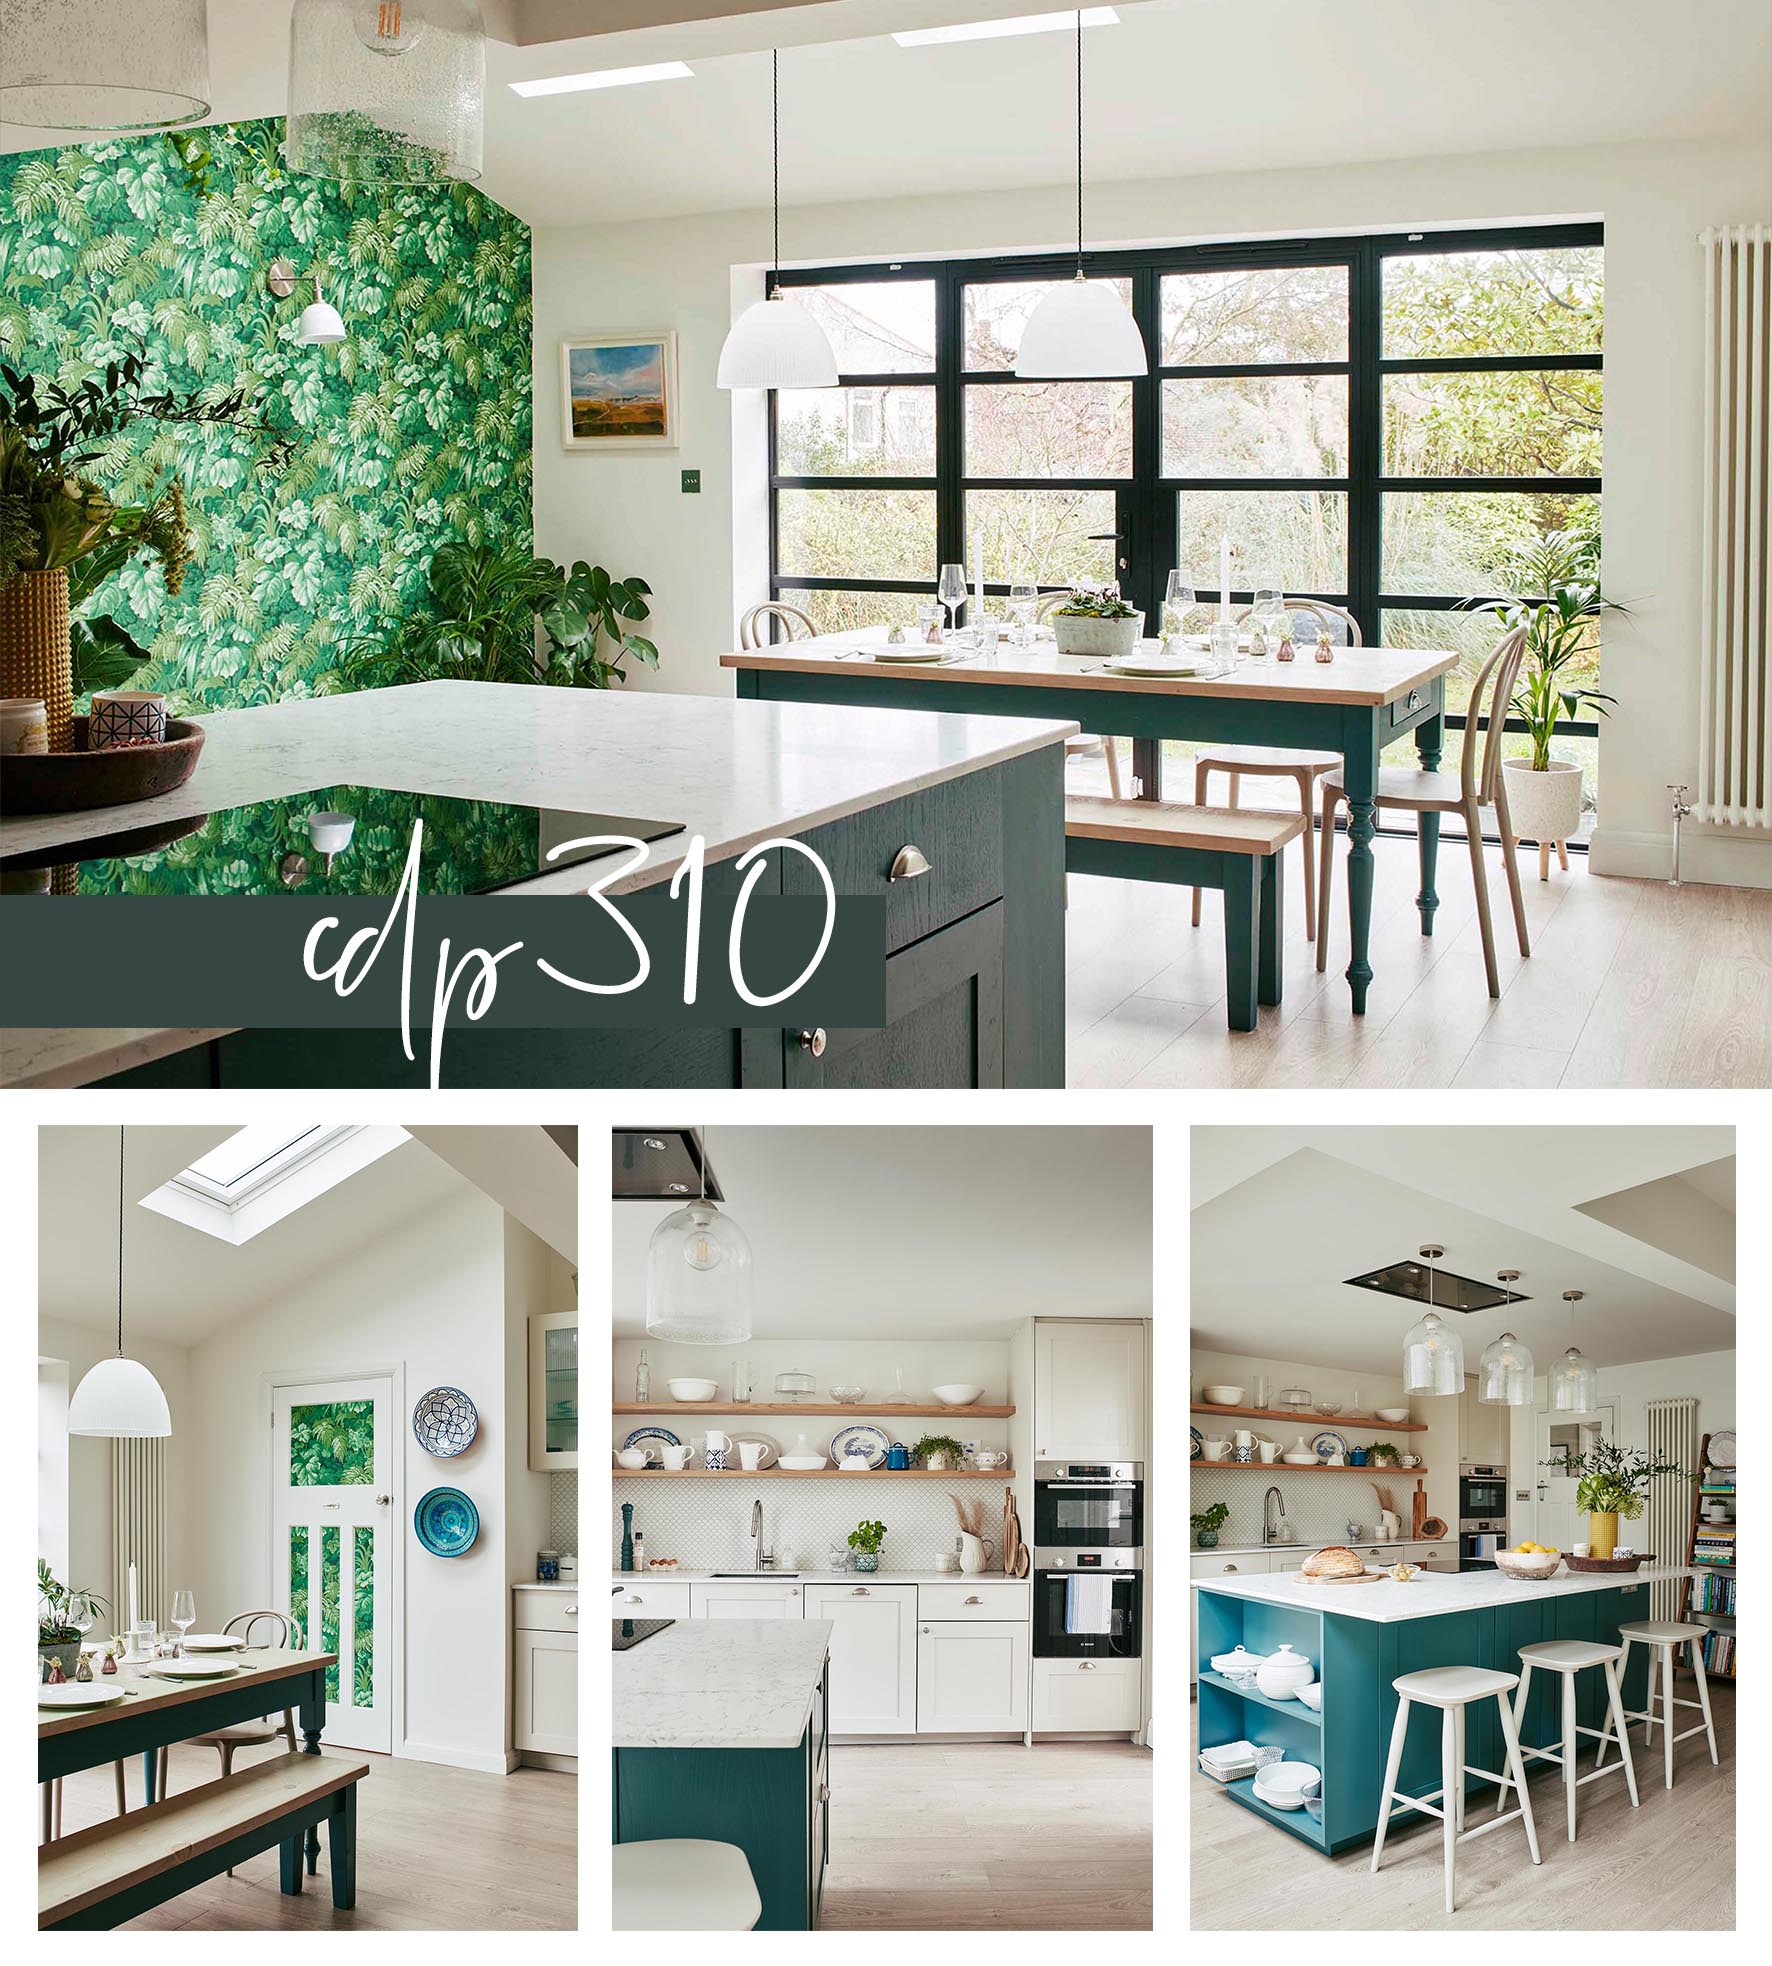 A visual tour around this light-filled space with earthy tones. Dark green kitchen hardware complimented by white surfaces and vibrant wallpaper with illustrated green leaves.